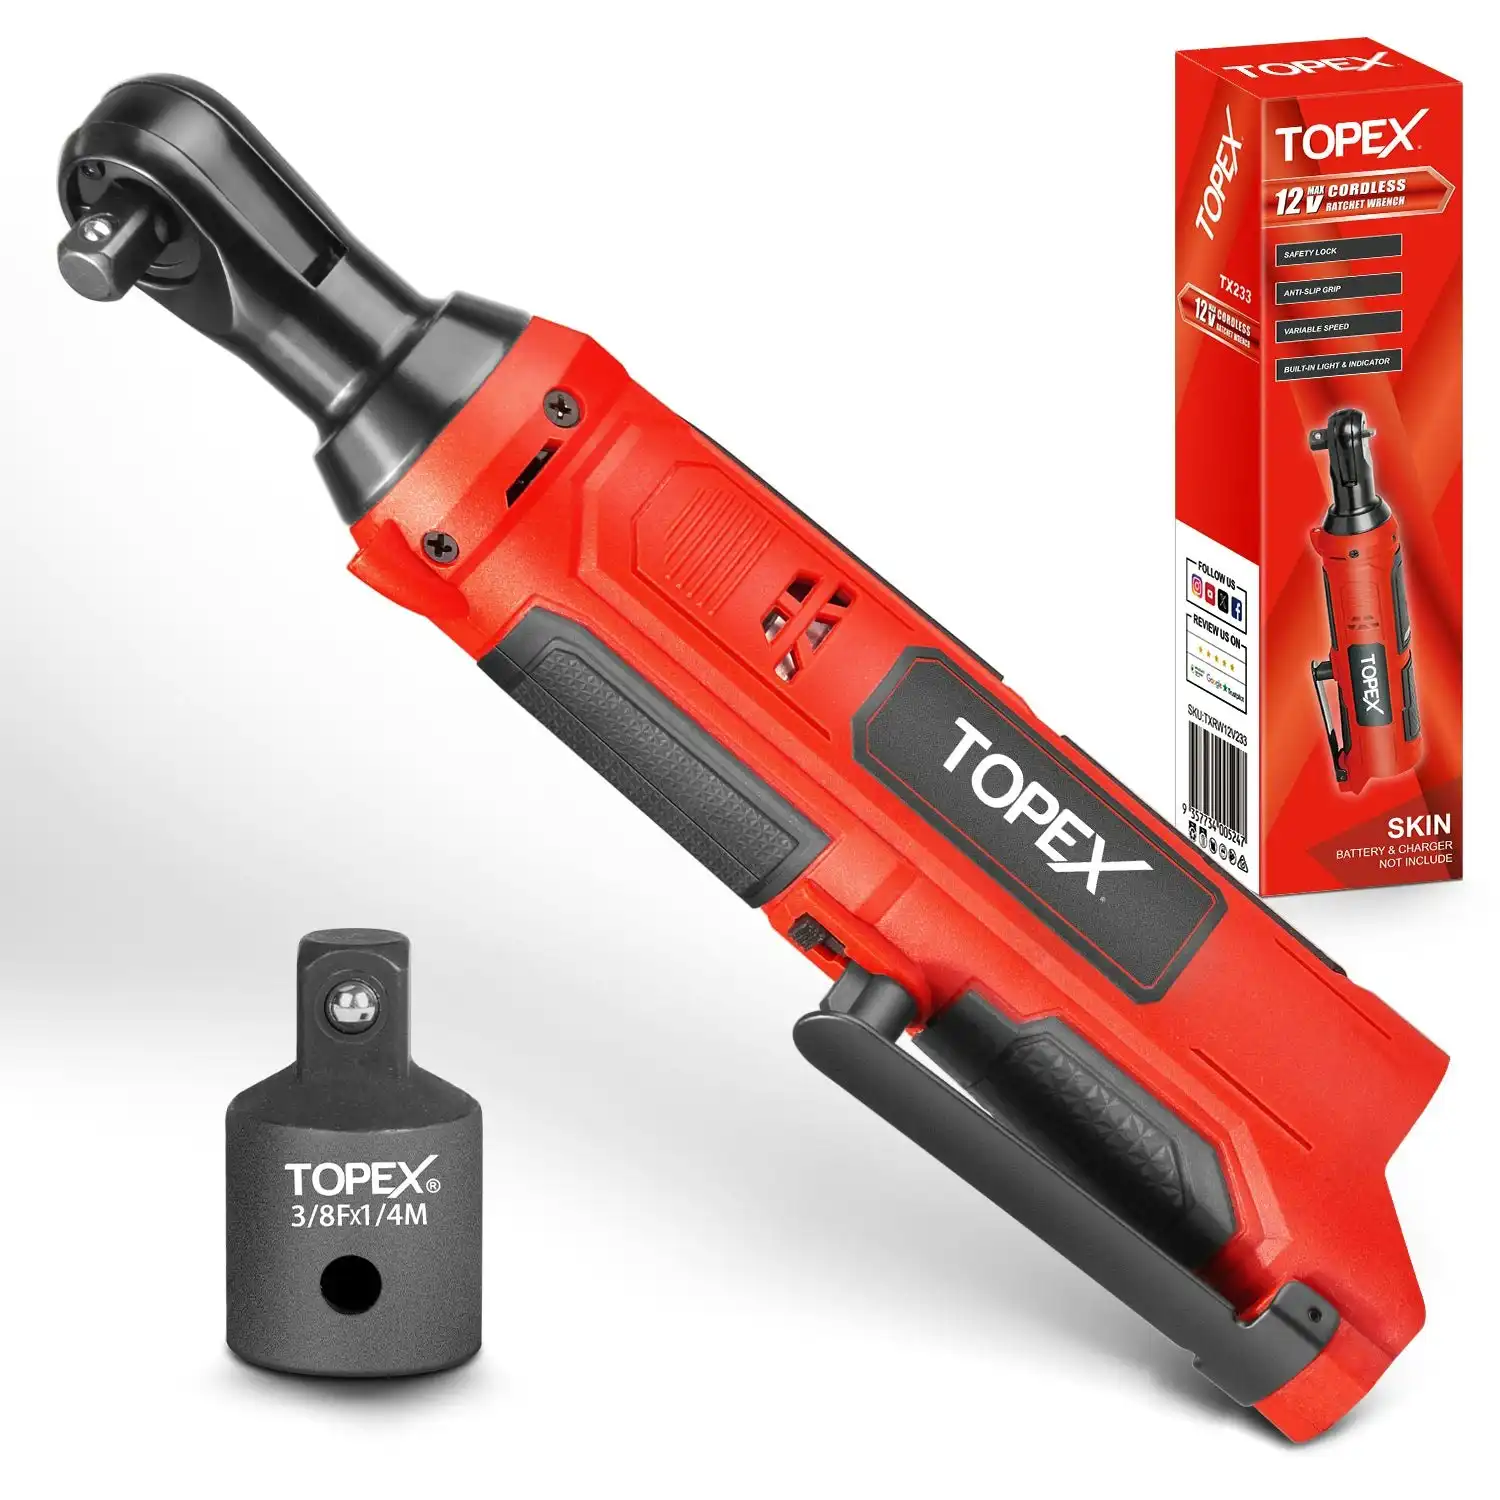 Topex 3/8" 12V Cordless Electric Ratchet Wrench 45NM 300RPM Variable Speed & LED Light Skin Only without Battery